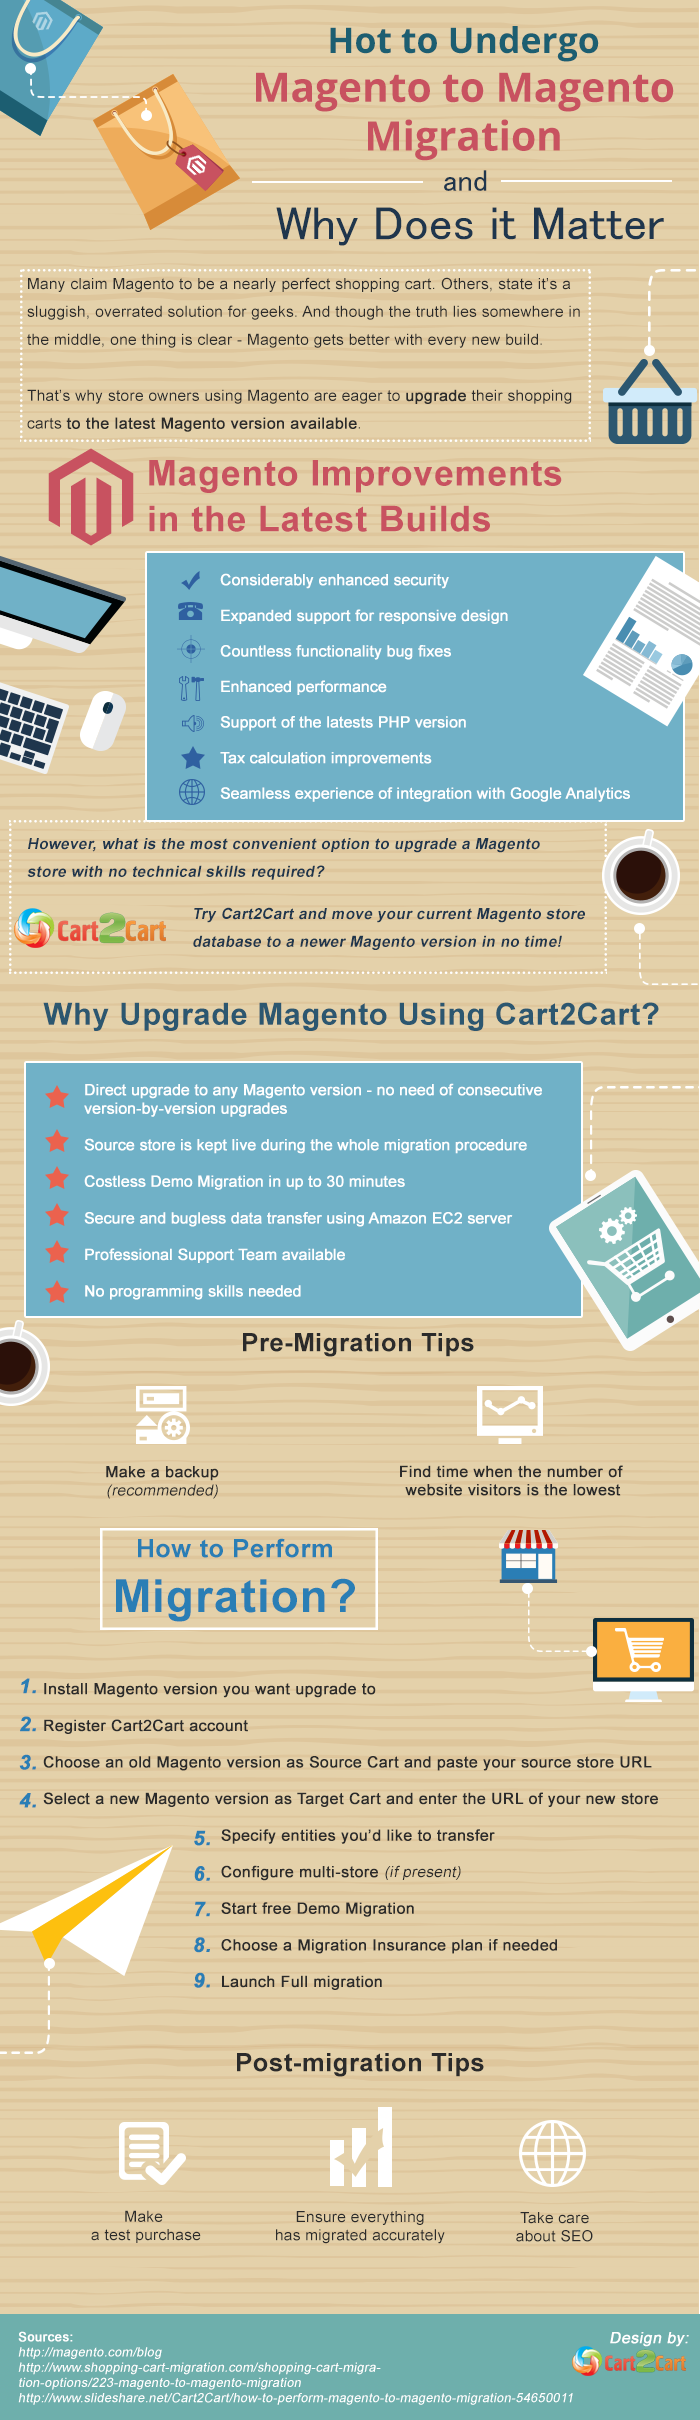 Magento to Magento Migration - Easy Ride to a Desired Destination [Infographic]